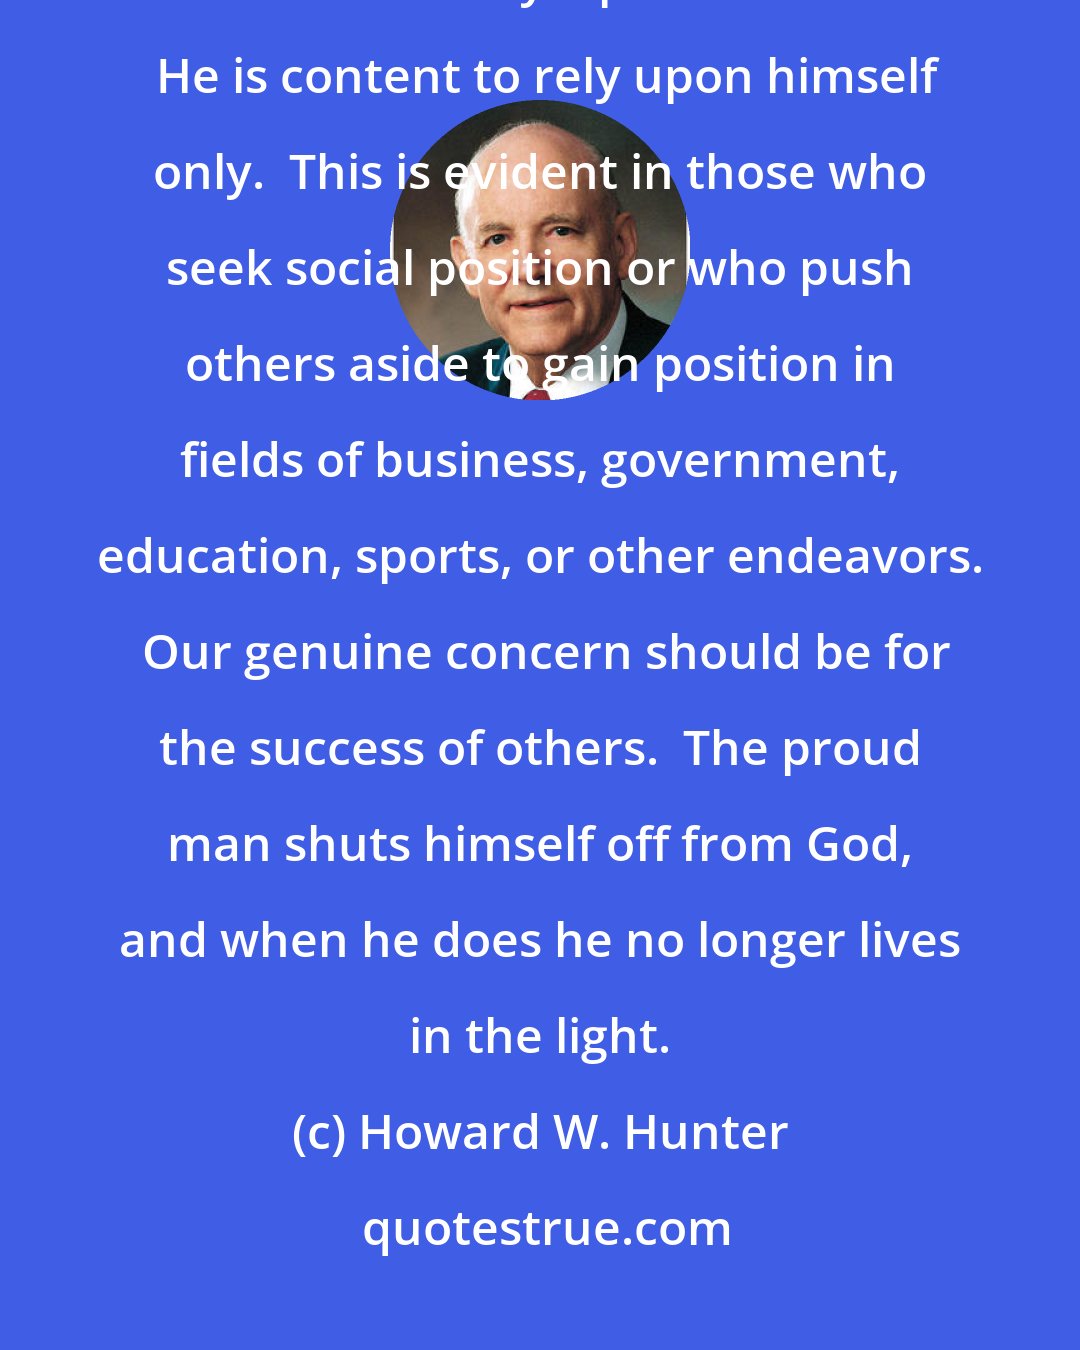 Howard W. Hunter: Humility is an attribute of godliness possessed by true Saints.  It is easy to understand why a proud man fails.  He is content to rely upon himself only.  This is evident in those who seek social position or who push others aside to gain position in fields of business, government, education, sports, or other endeavors.  Our genuine concern should be for the success of others.  The proud man shuts himself off from God, and when he does he no longer lives in the light.